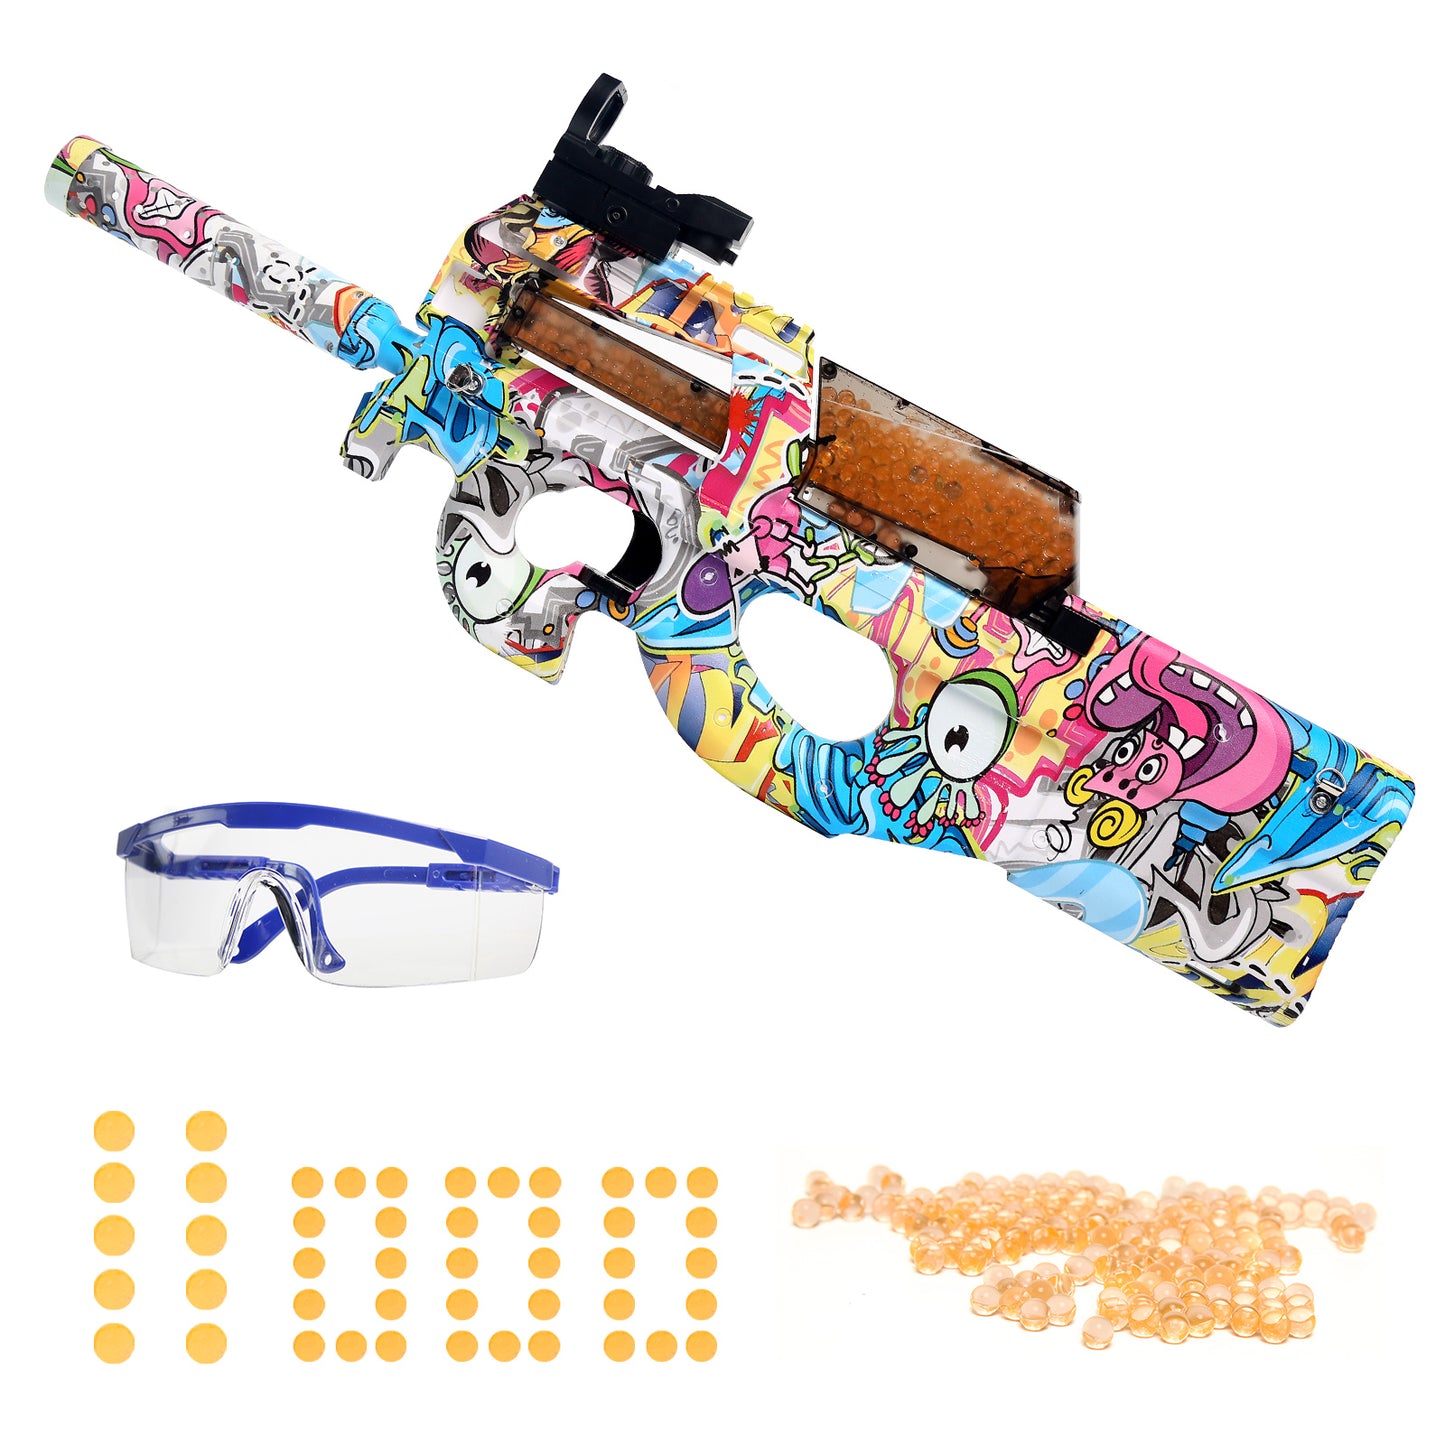 Electric Splatter Gel Ball Blaster Toy with 11000 Non-Toxic Gellets